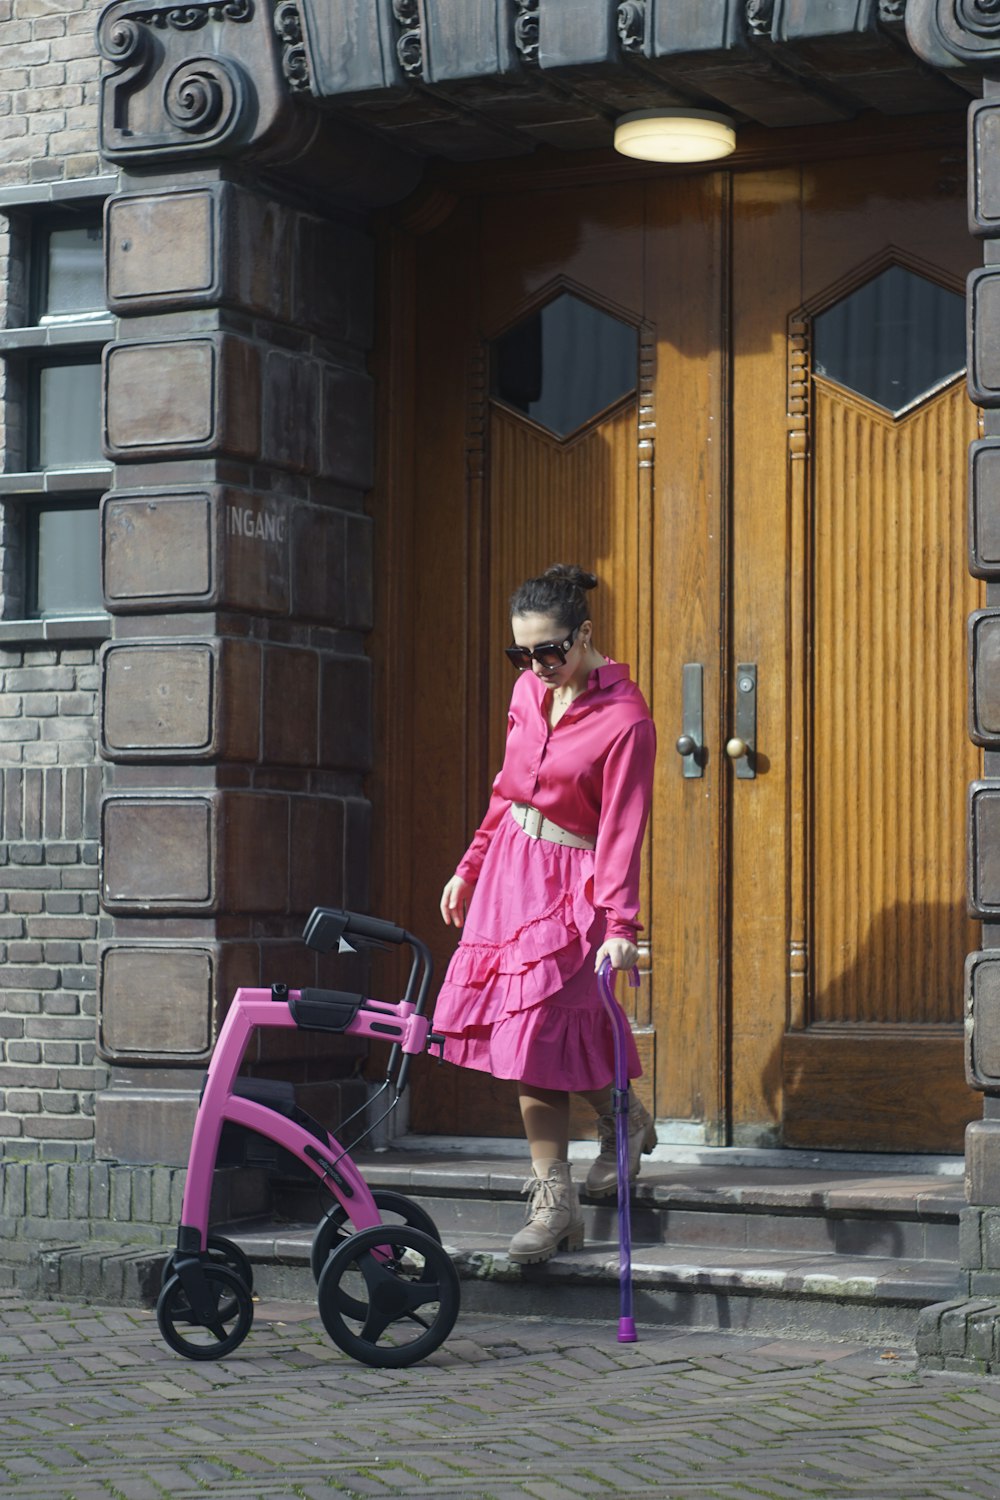 a woman in a pink dress is pulling a stroller